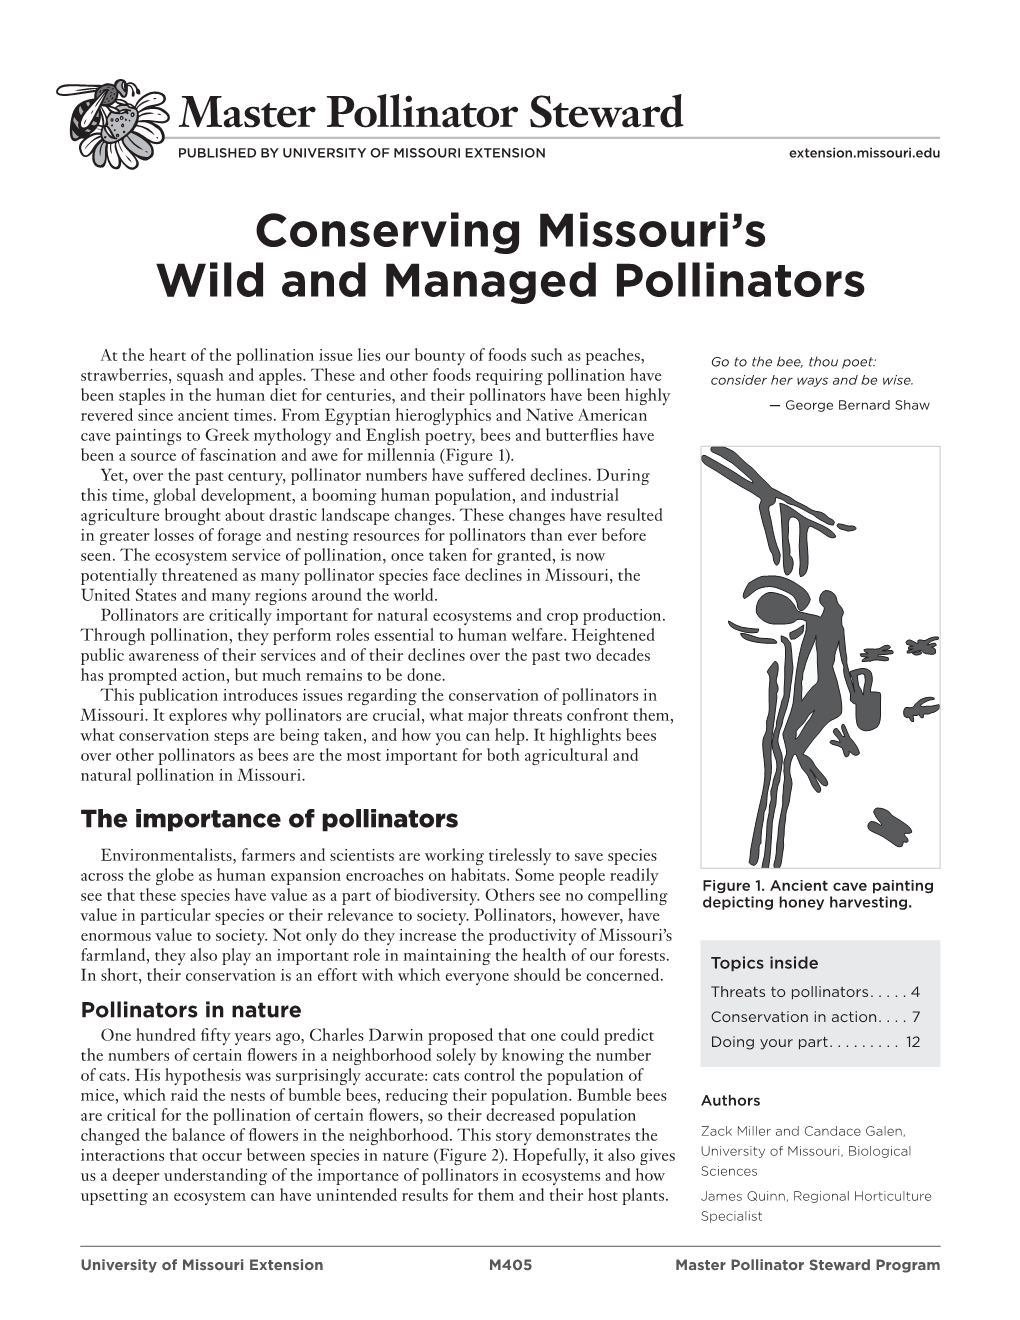 Conserving Missouri's Wild and Managed Pollinators